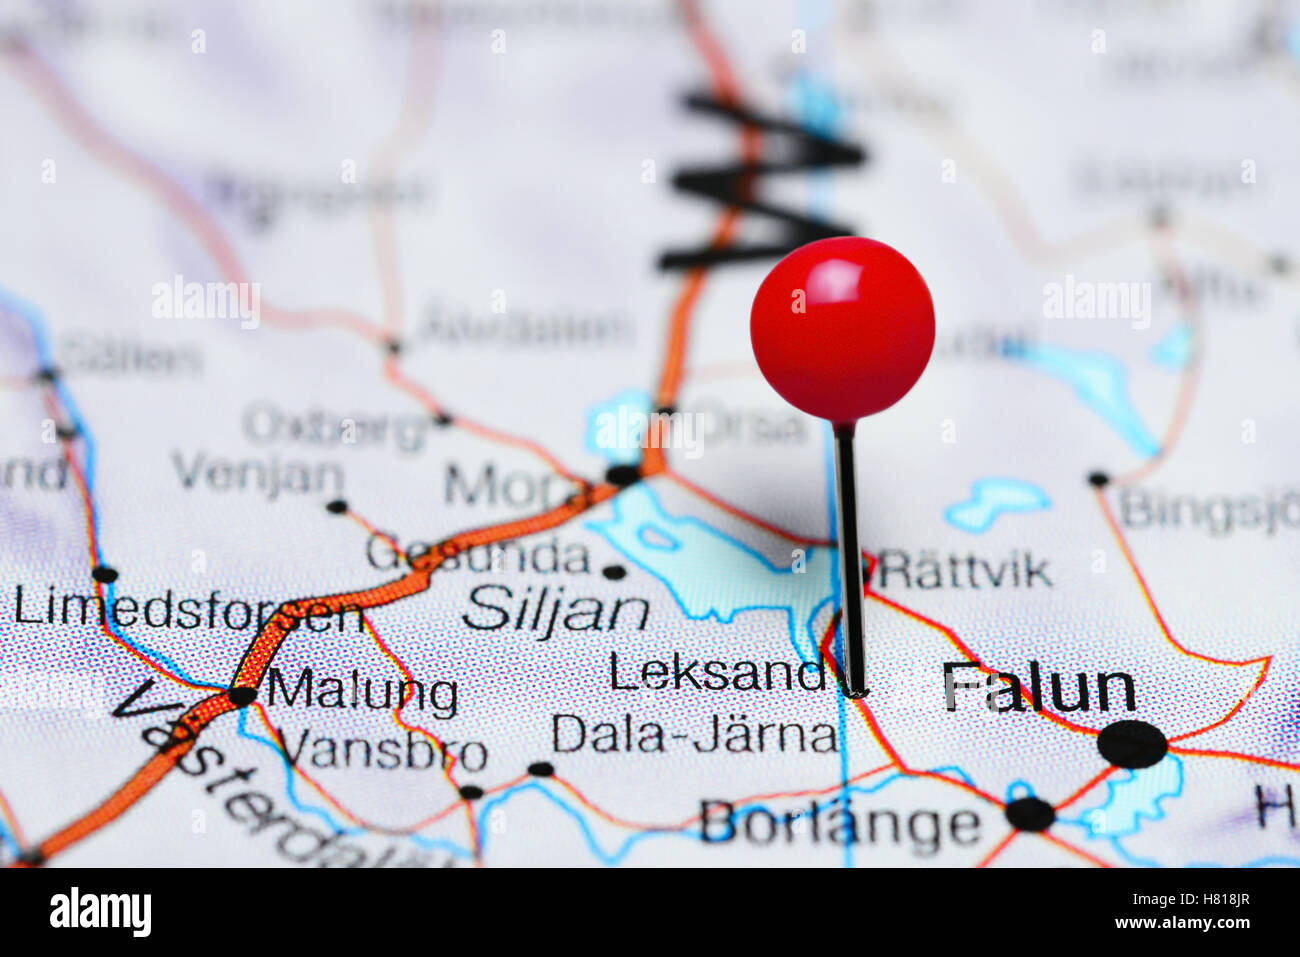 Leksand pinned on a map of Sweden Stock Photo